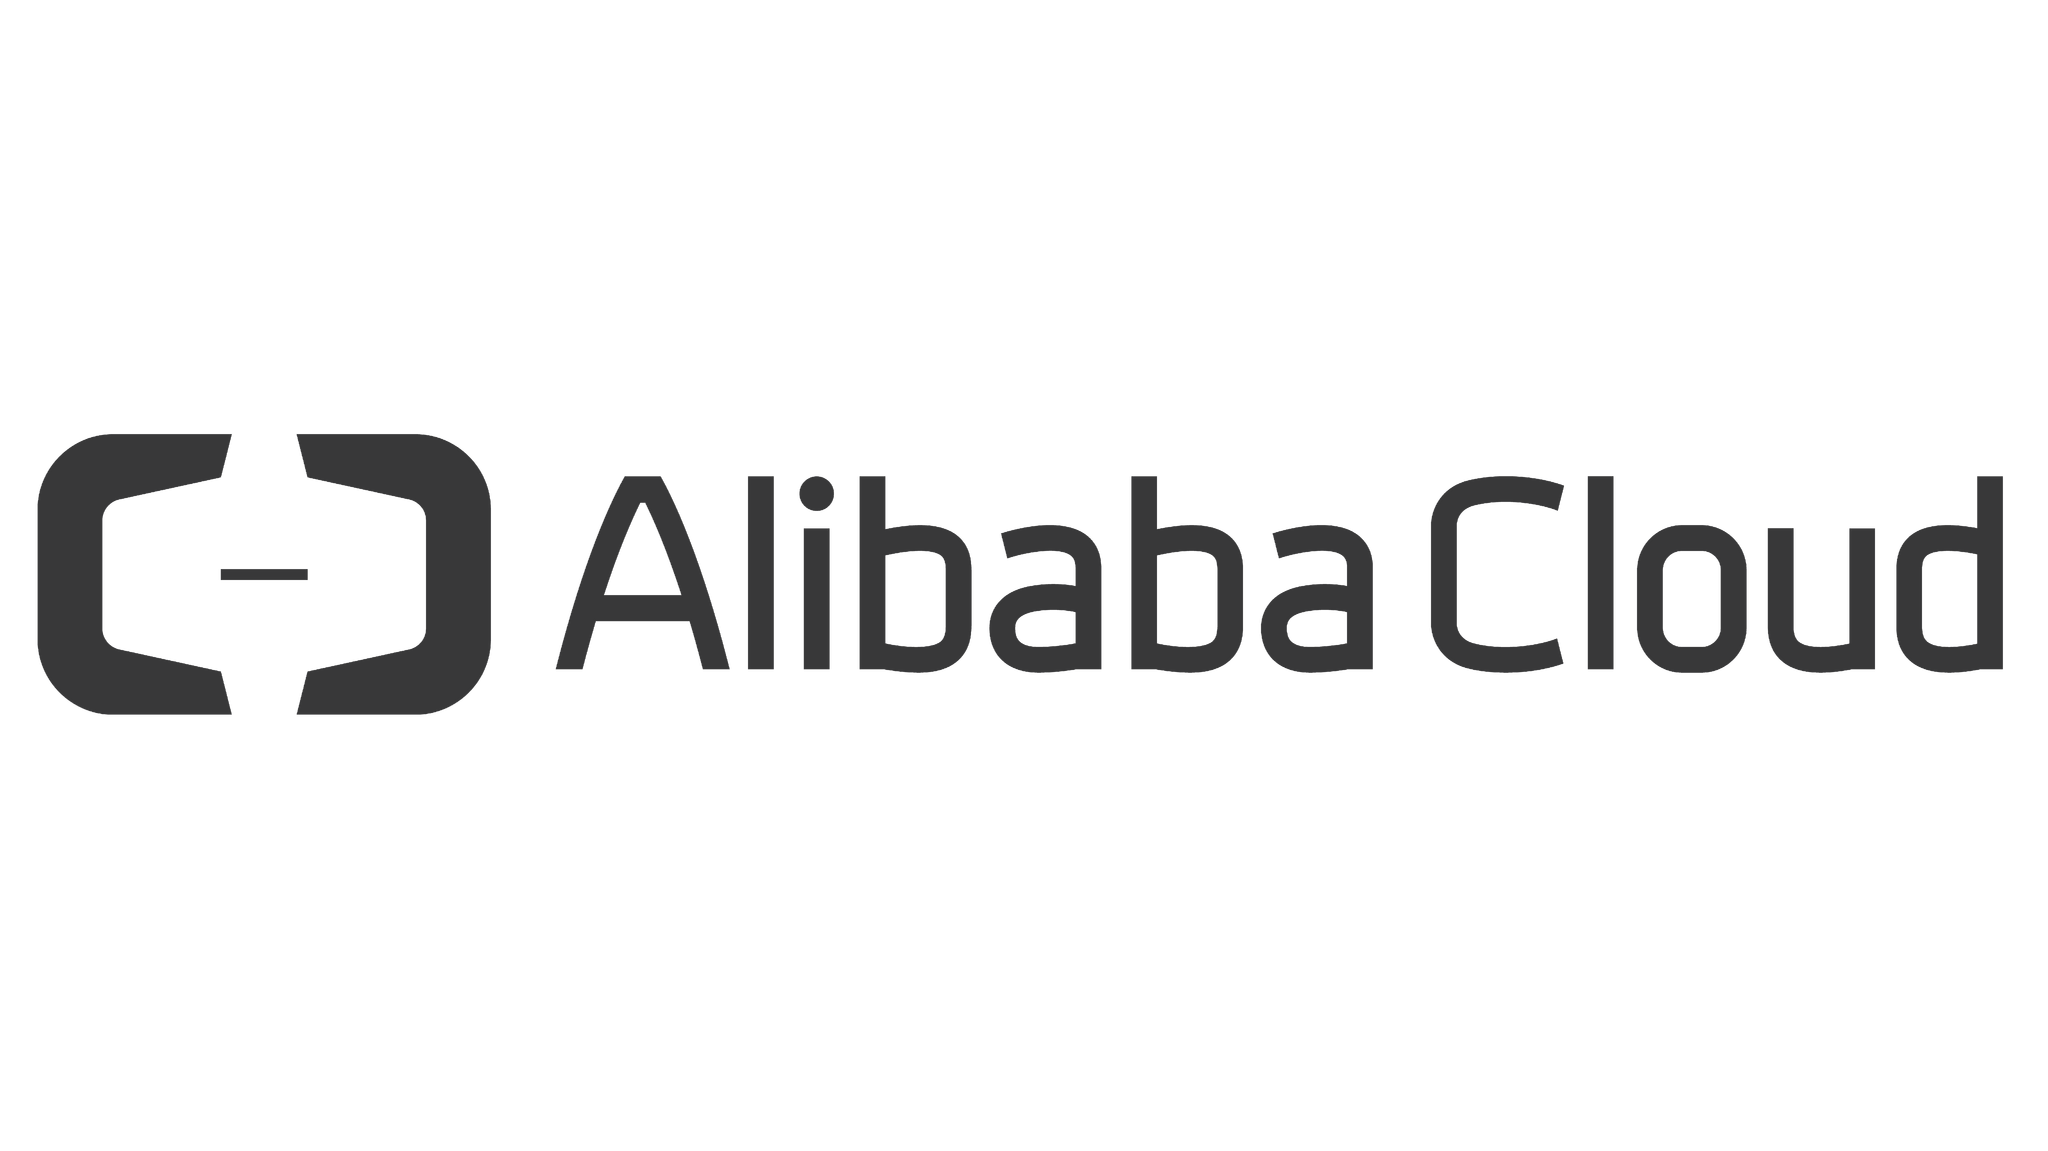 Alibaba Cloud Launches 2nd Data Centre in India - The Indian Wire